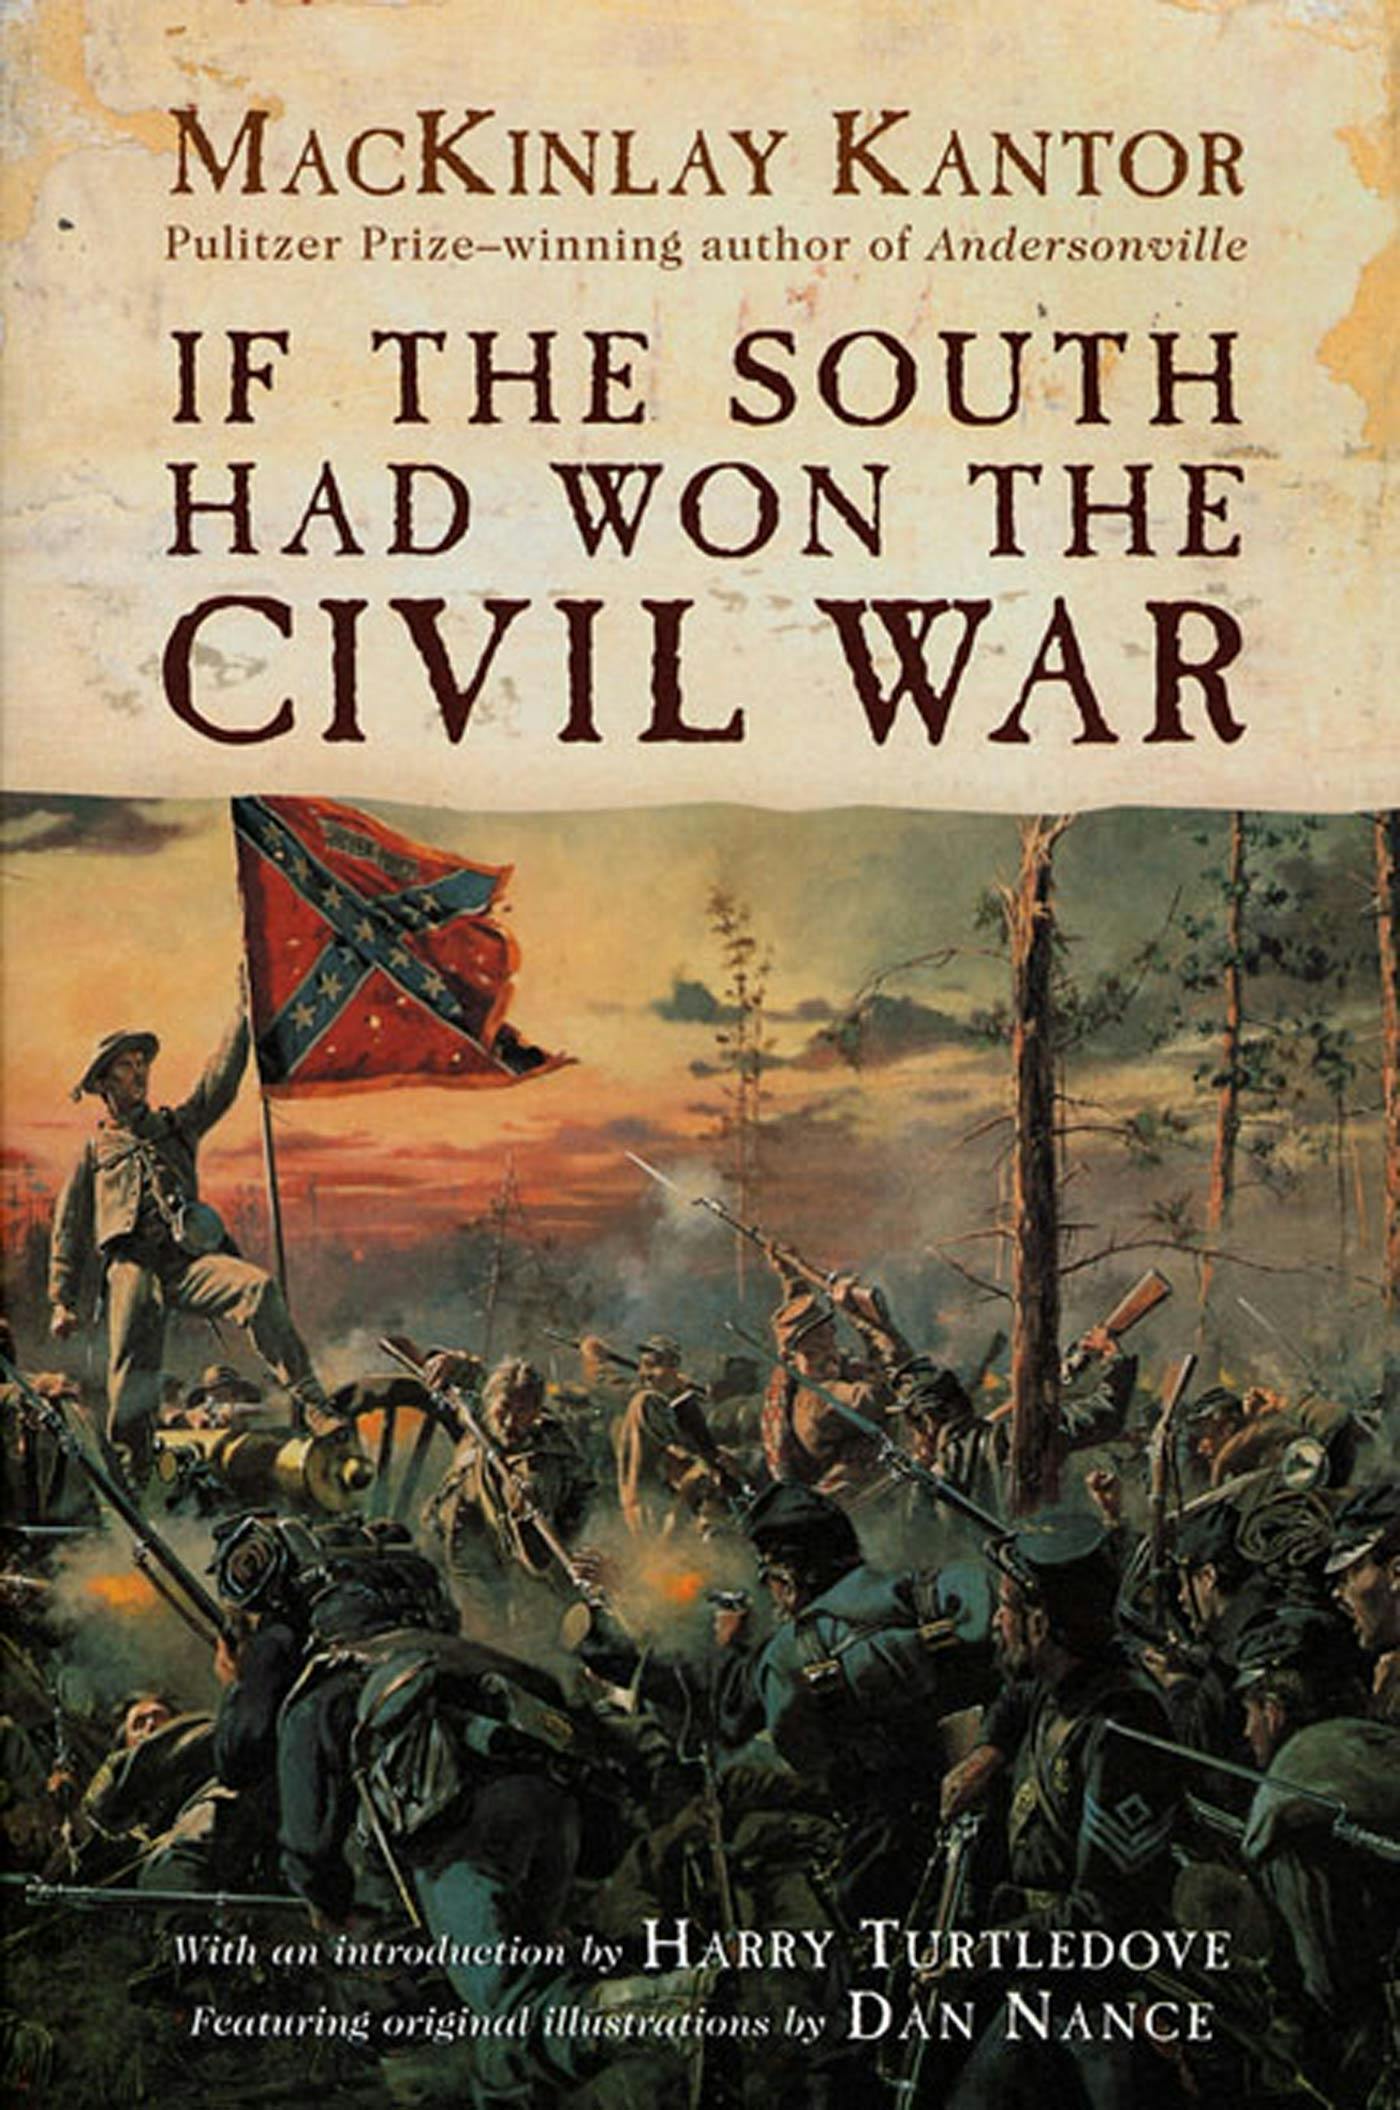 what if the south won the civil war essay